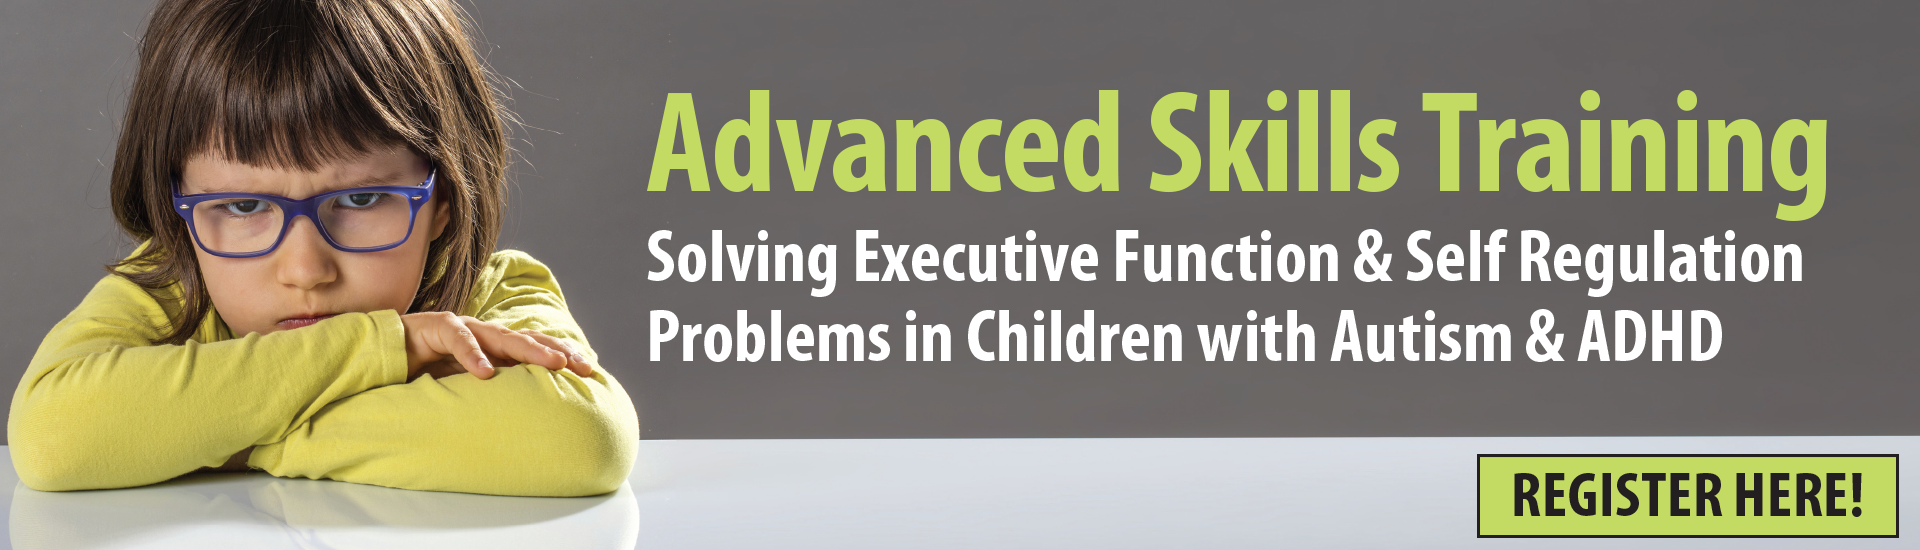 Advanced Skills Training: Solving Executive Function & Self-Regulation Problems in Children with Autism & ADHD